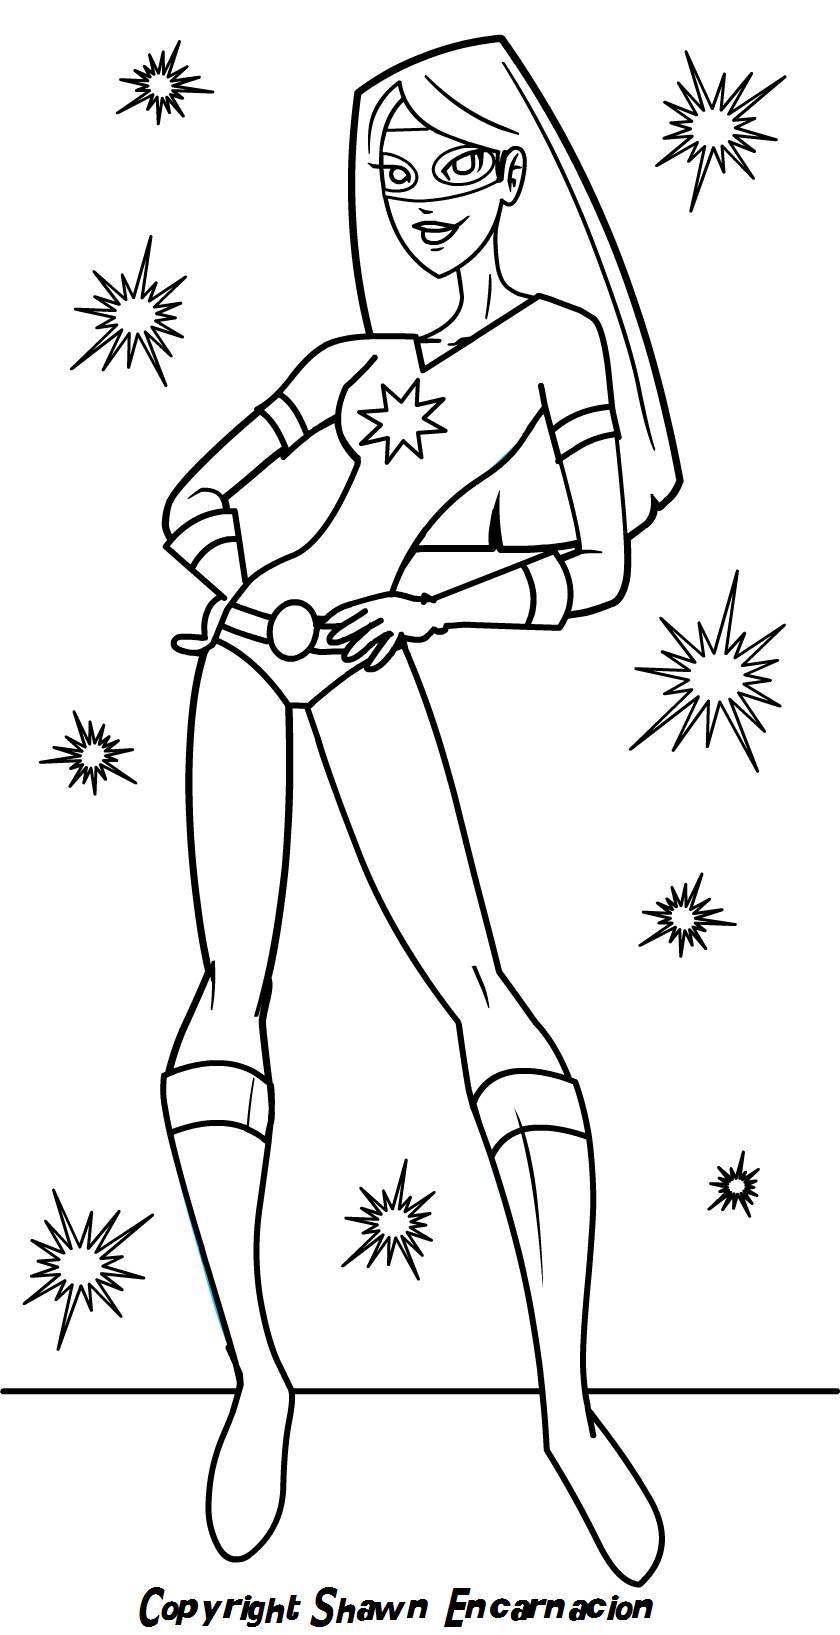 Cartoon superheroes coloring pages download and print for free